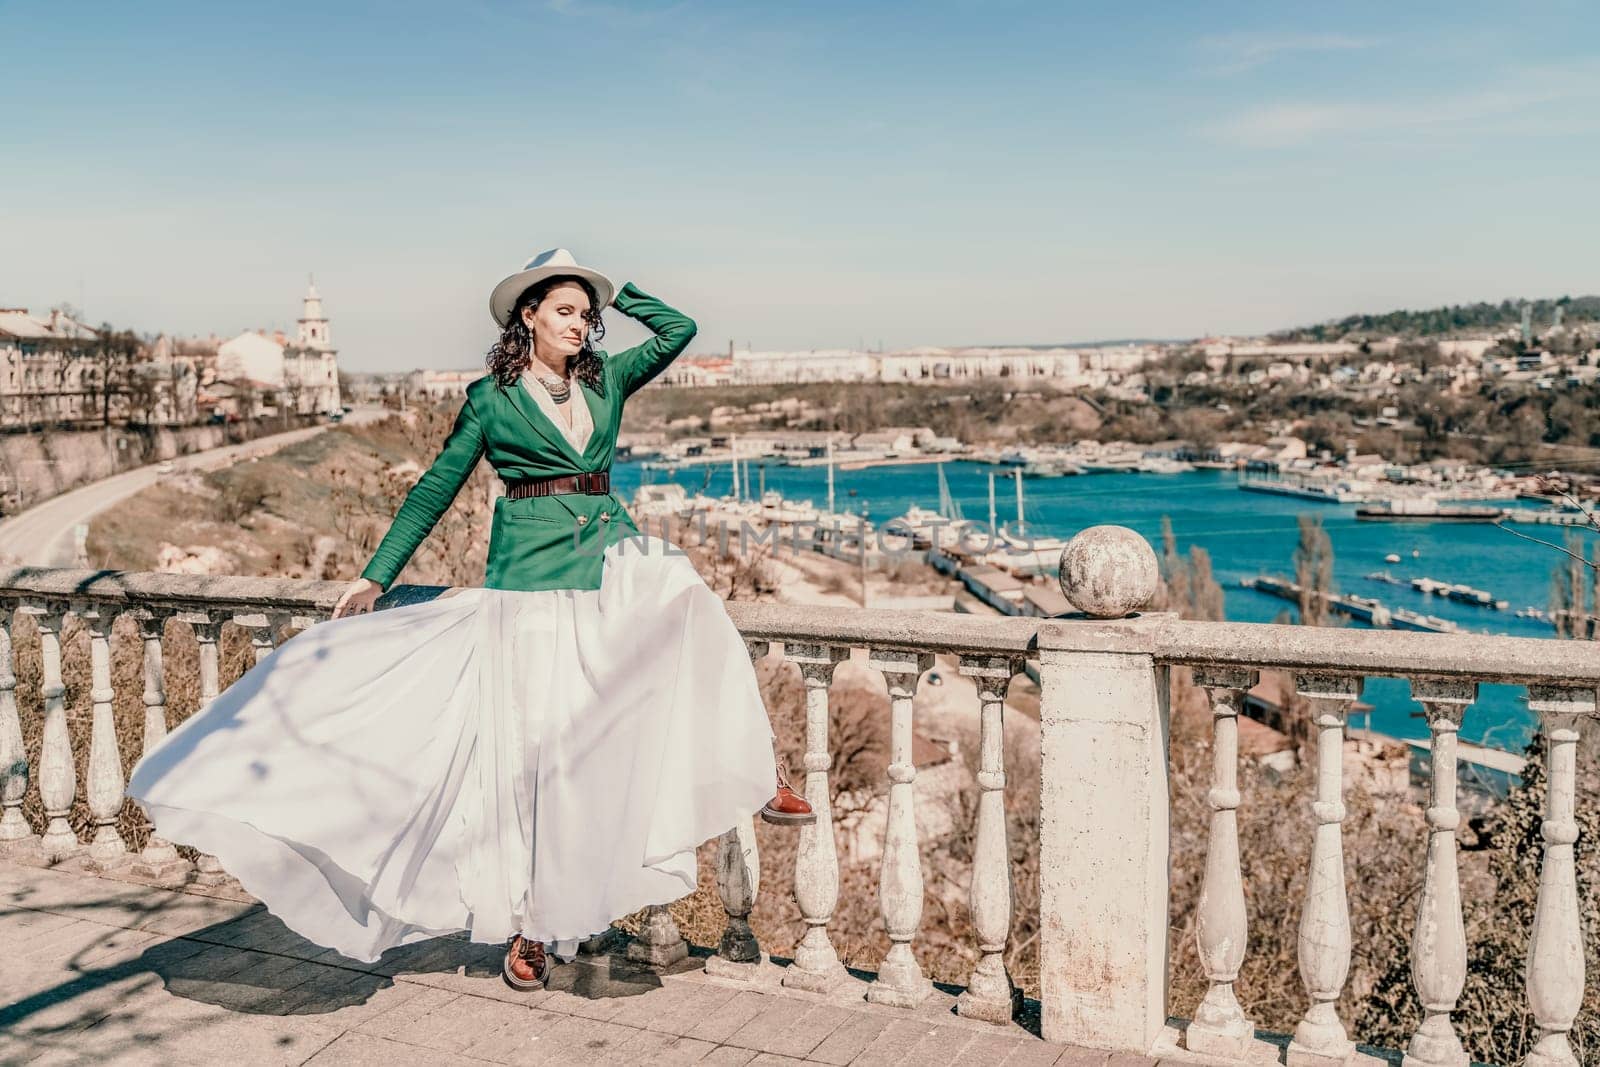 Woman walks around the city, lifestyle. A young beautiful woman in a green jacket, white skirt and hat is sitting on a white fence with balusters overlooking the sea bay and the city. by Matiunina